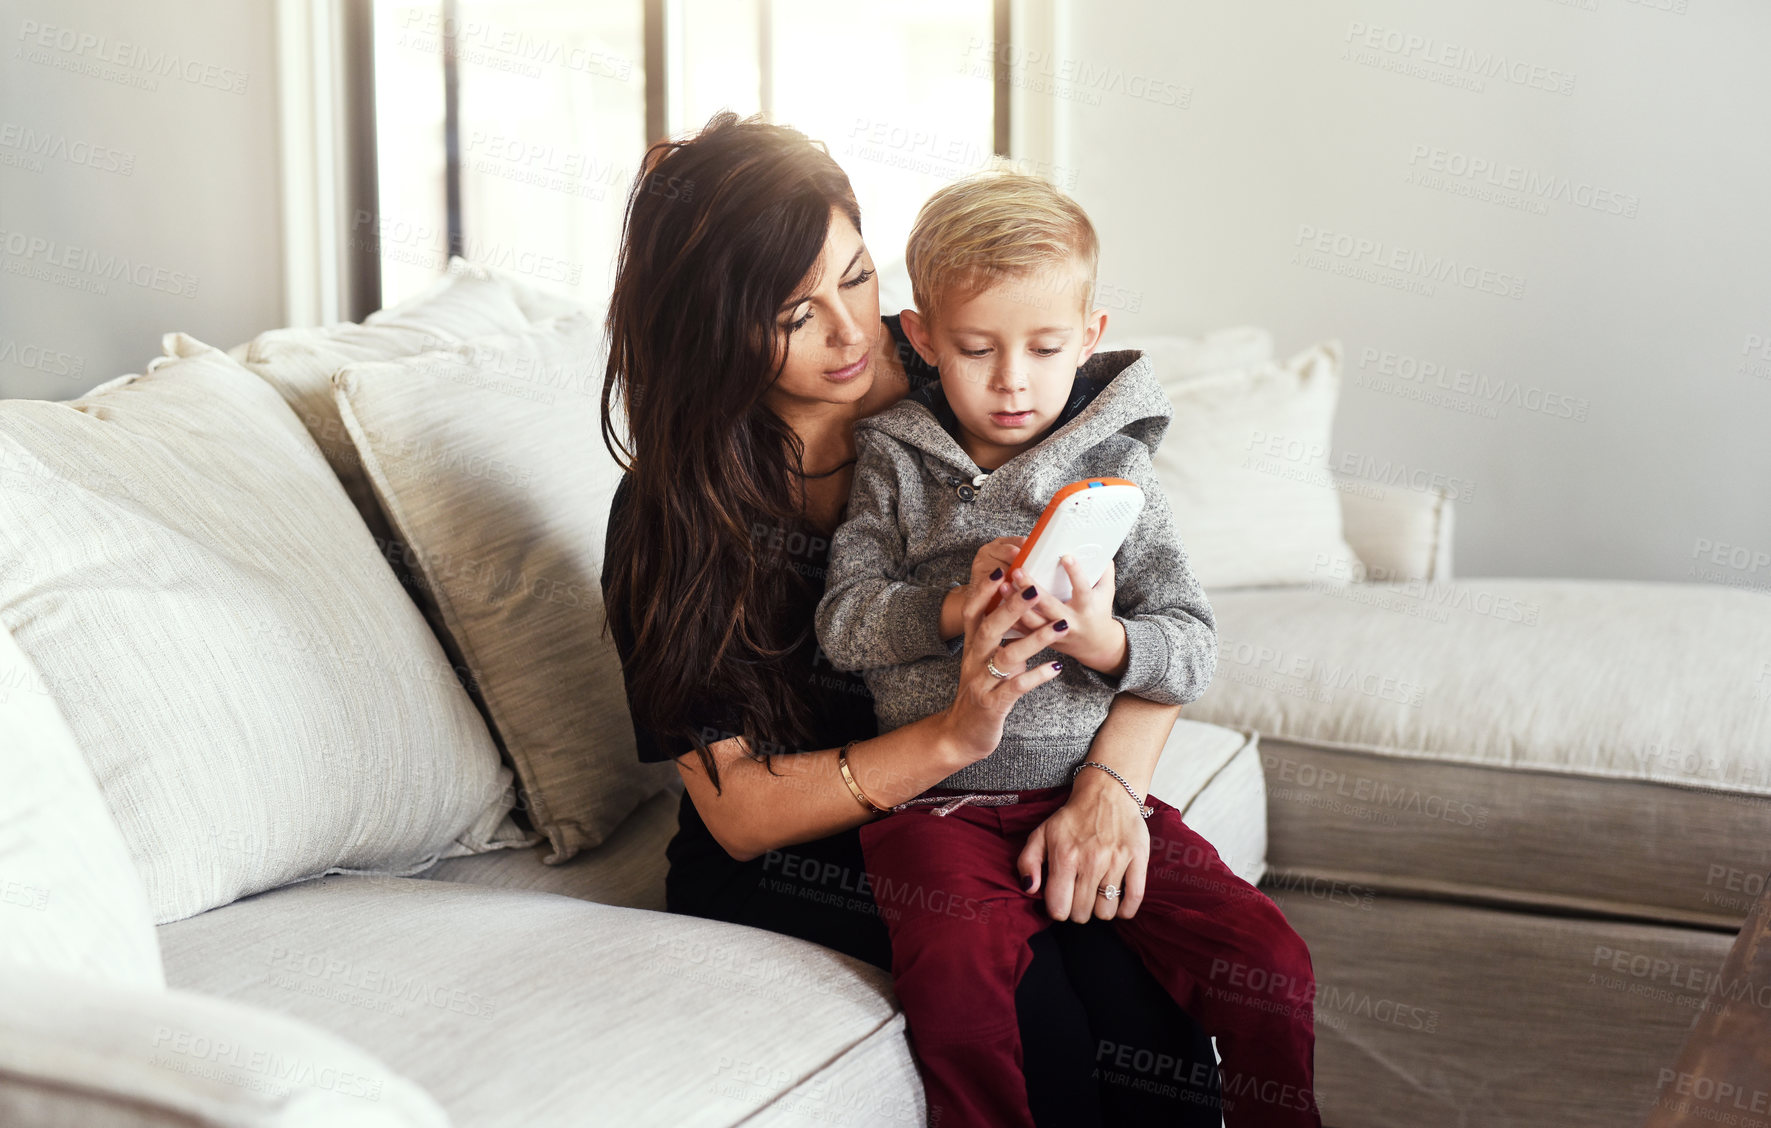 Buy stock photo Shot of a carefree young woman browsing on a cellphone with her little boy while being seated on a sofa at home during the day